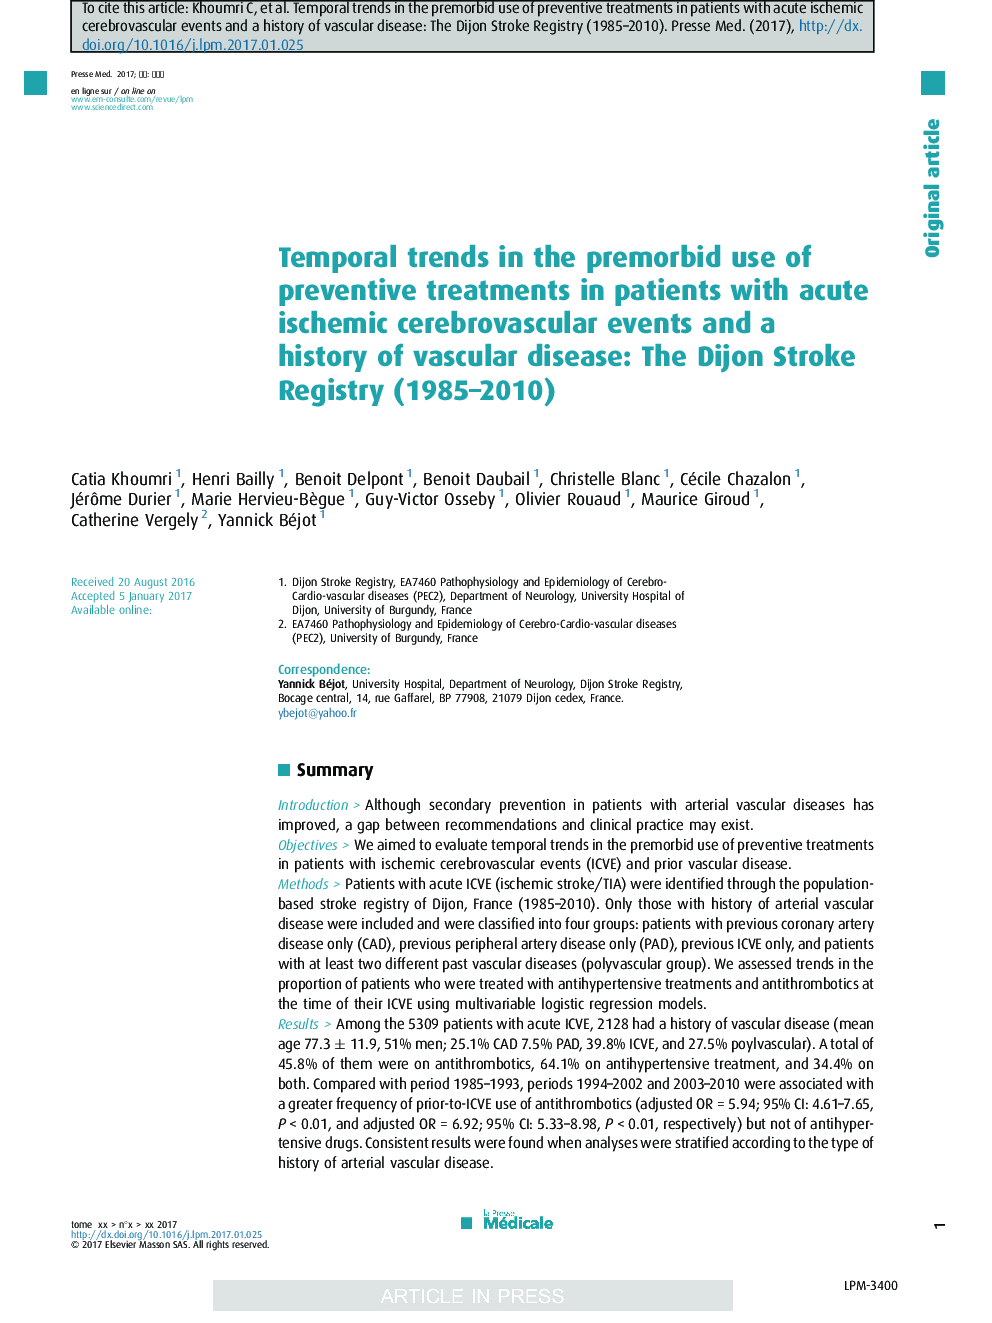 Temporal trends in the premorbid use of preventive treatments in patients with acute ischemic cerebrovascular events and a history of vascular disease: The Dijon Stroke Registry (1985-2010)